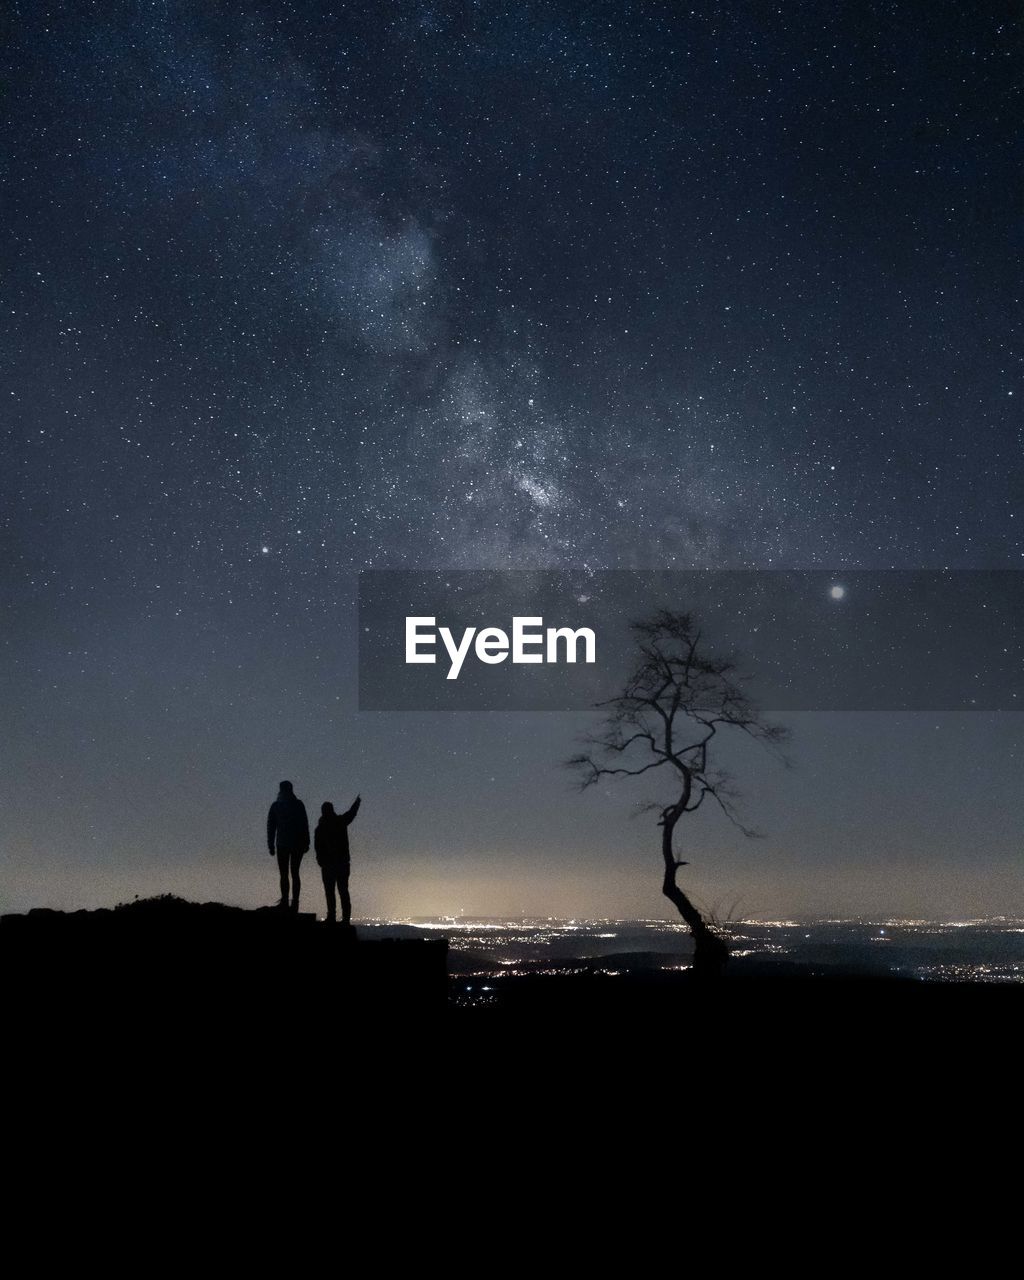 star, night, sky, space, silhouette, astronomy, scenics - nature, galaxy, nature, beauty in nature, space and astronomy, milky way, science, landscape, tree, environment, astronomical object, darkness, land, moonlight, star field, constellation, men, plant, tranquility, dark, tranquil scene, outdoors, two people, mammal, standing, infinity